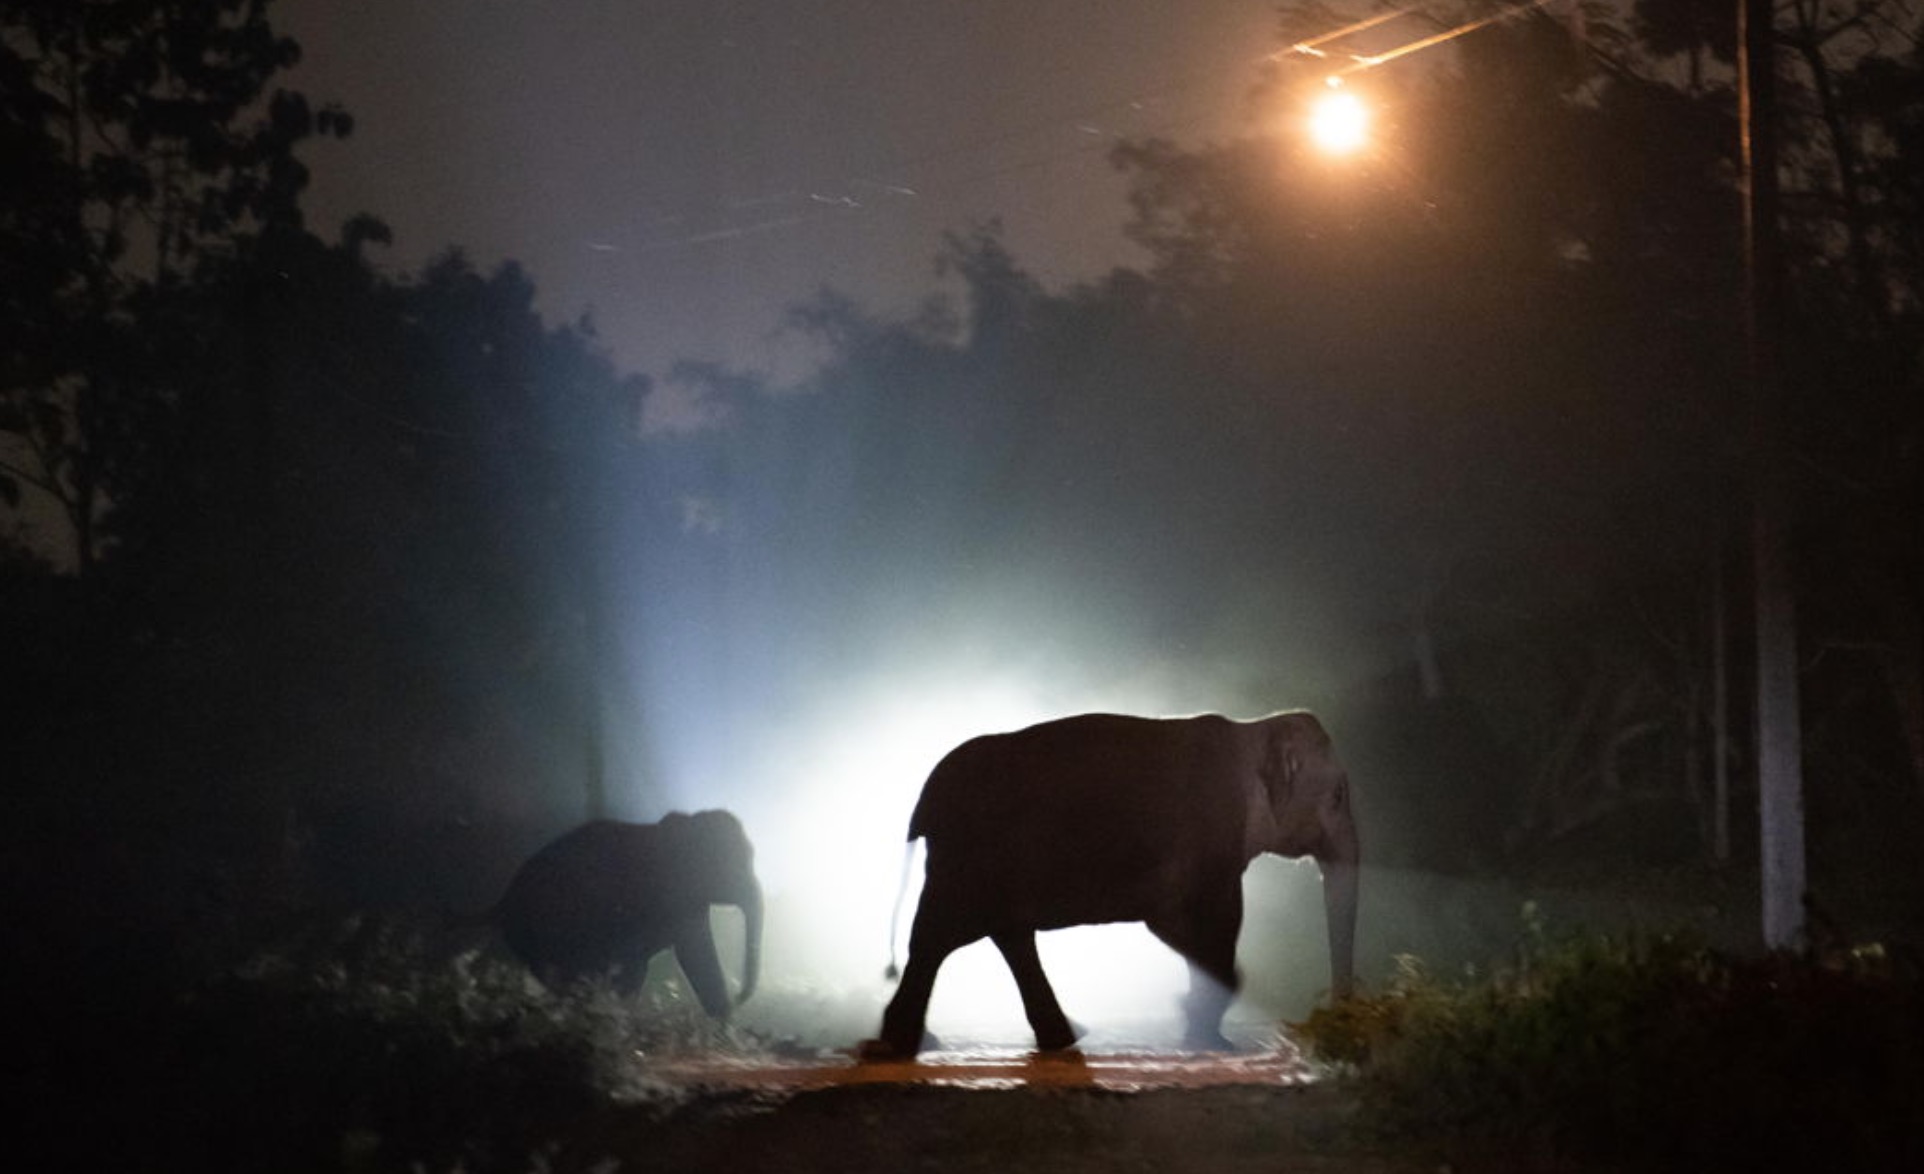   Assam elephants roam in search of food  images - ABC 